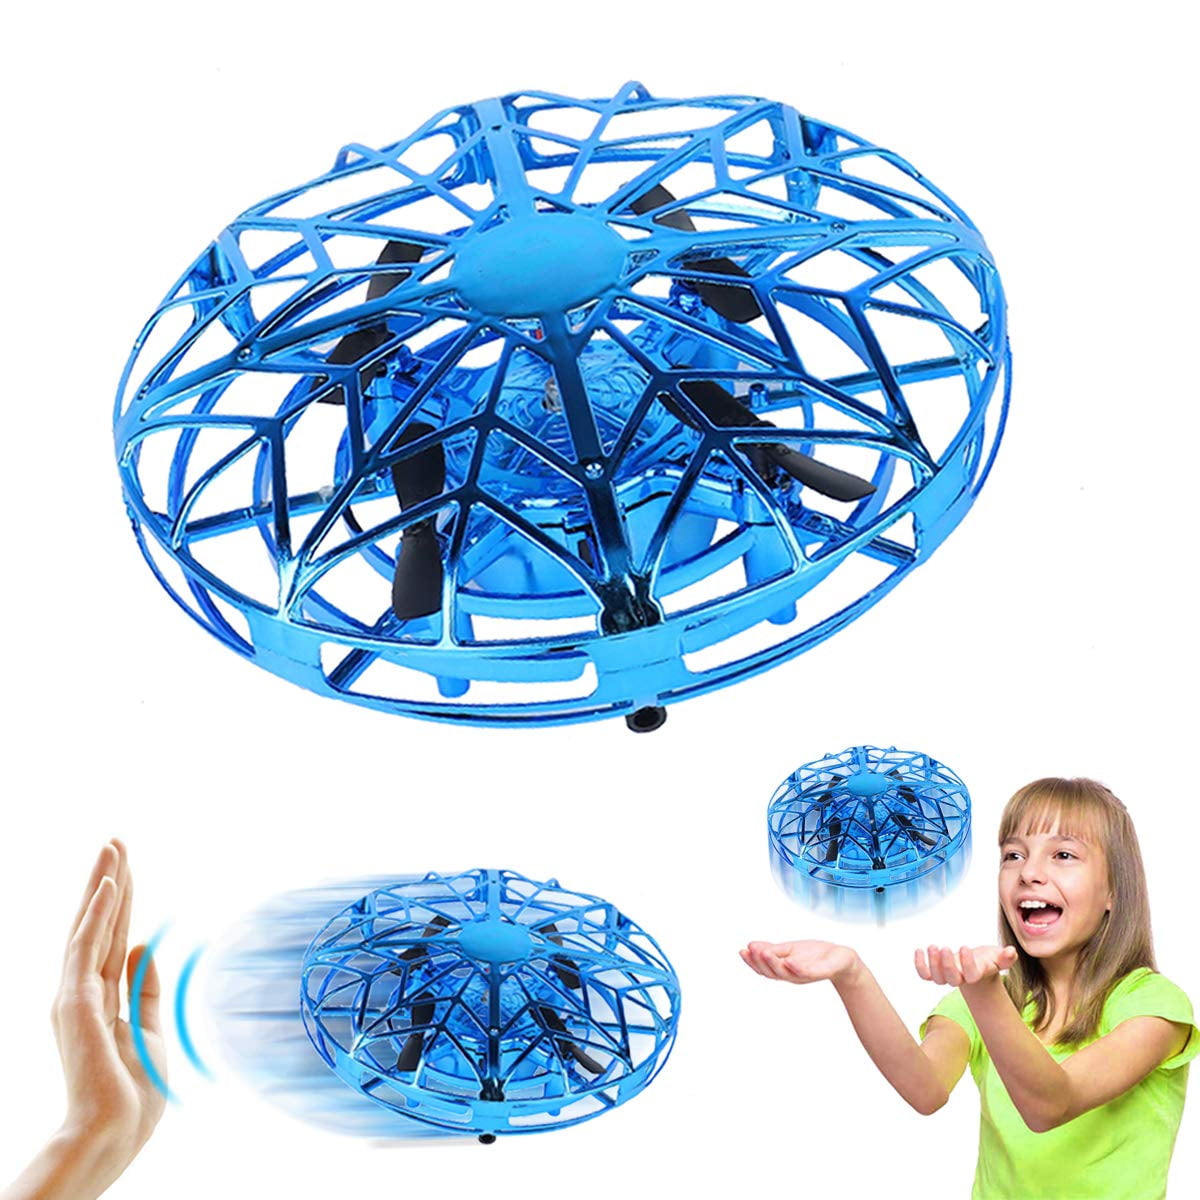 Orange Infrared Induction Flying Toys with LED Lights Xmas Gifts for Boys Girls Adults Indoor Outdoor Ball Toys Kids Toys Hand Gesture Controlled Helicopter Quadcopter UFO Mini Drone 